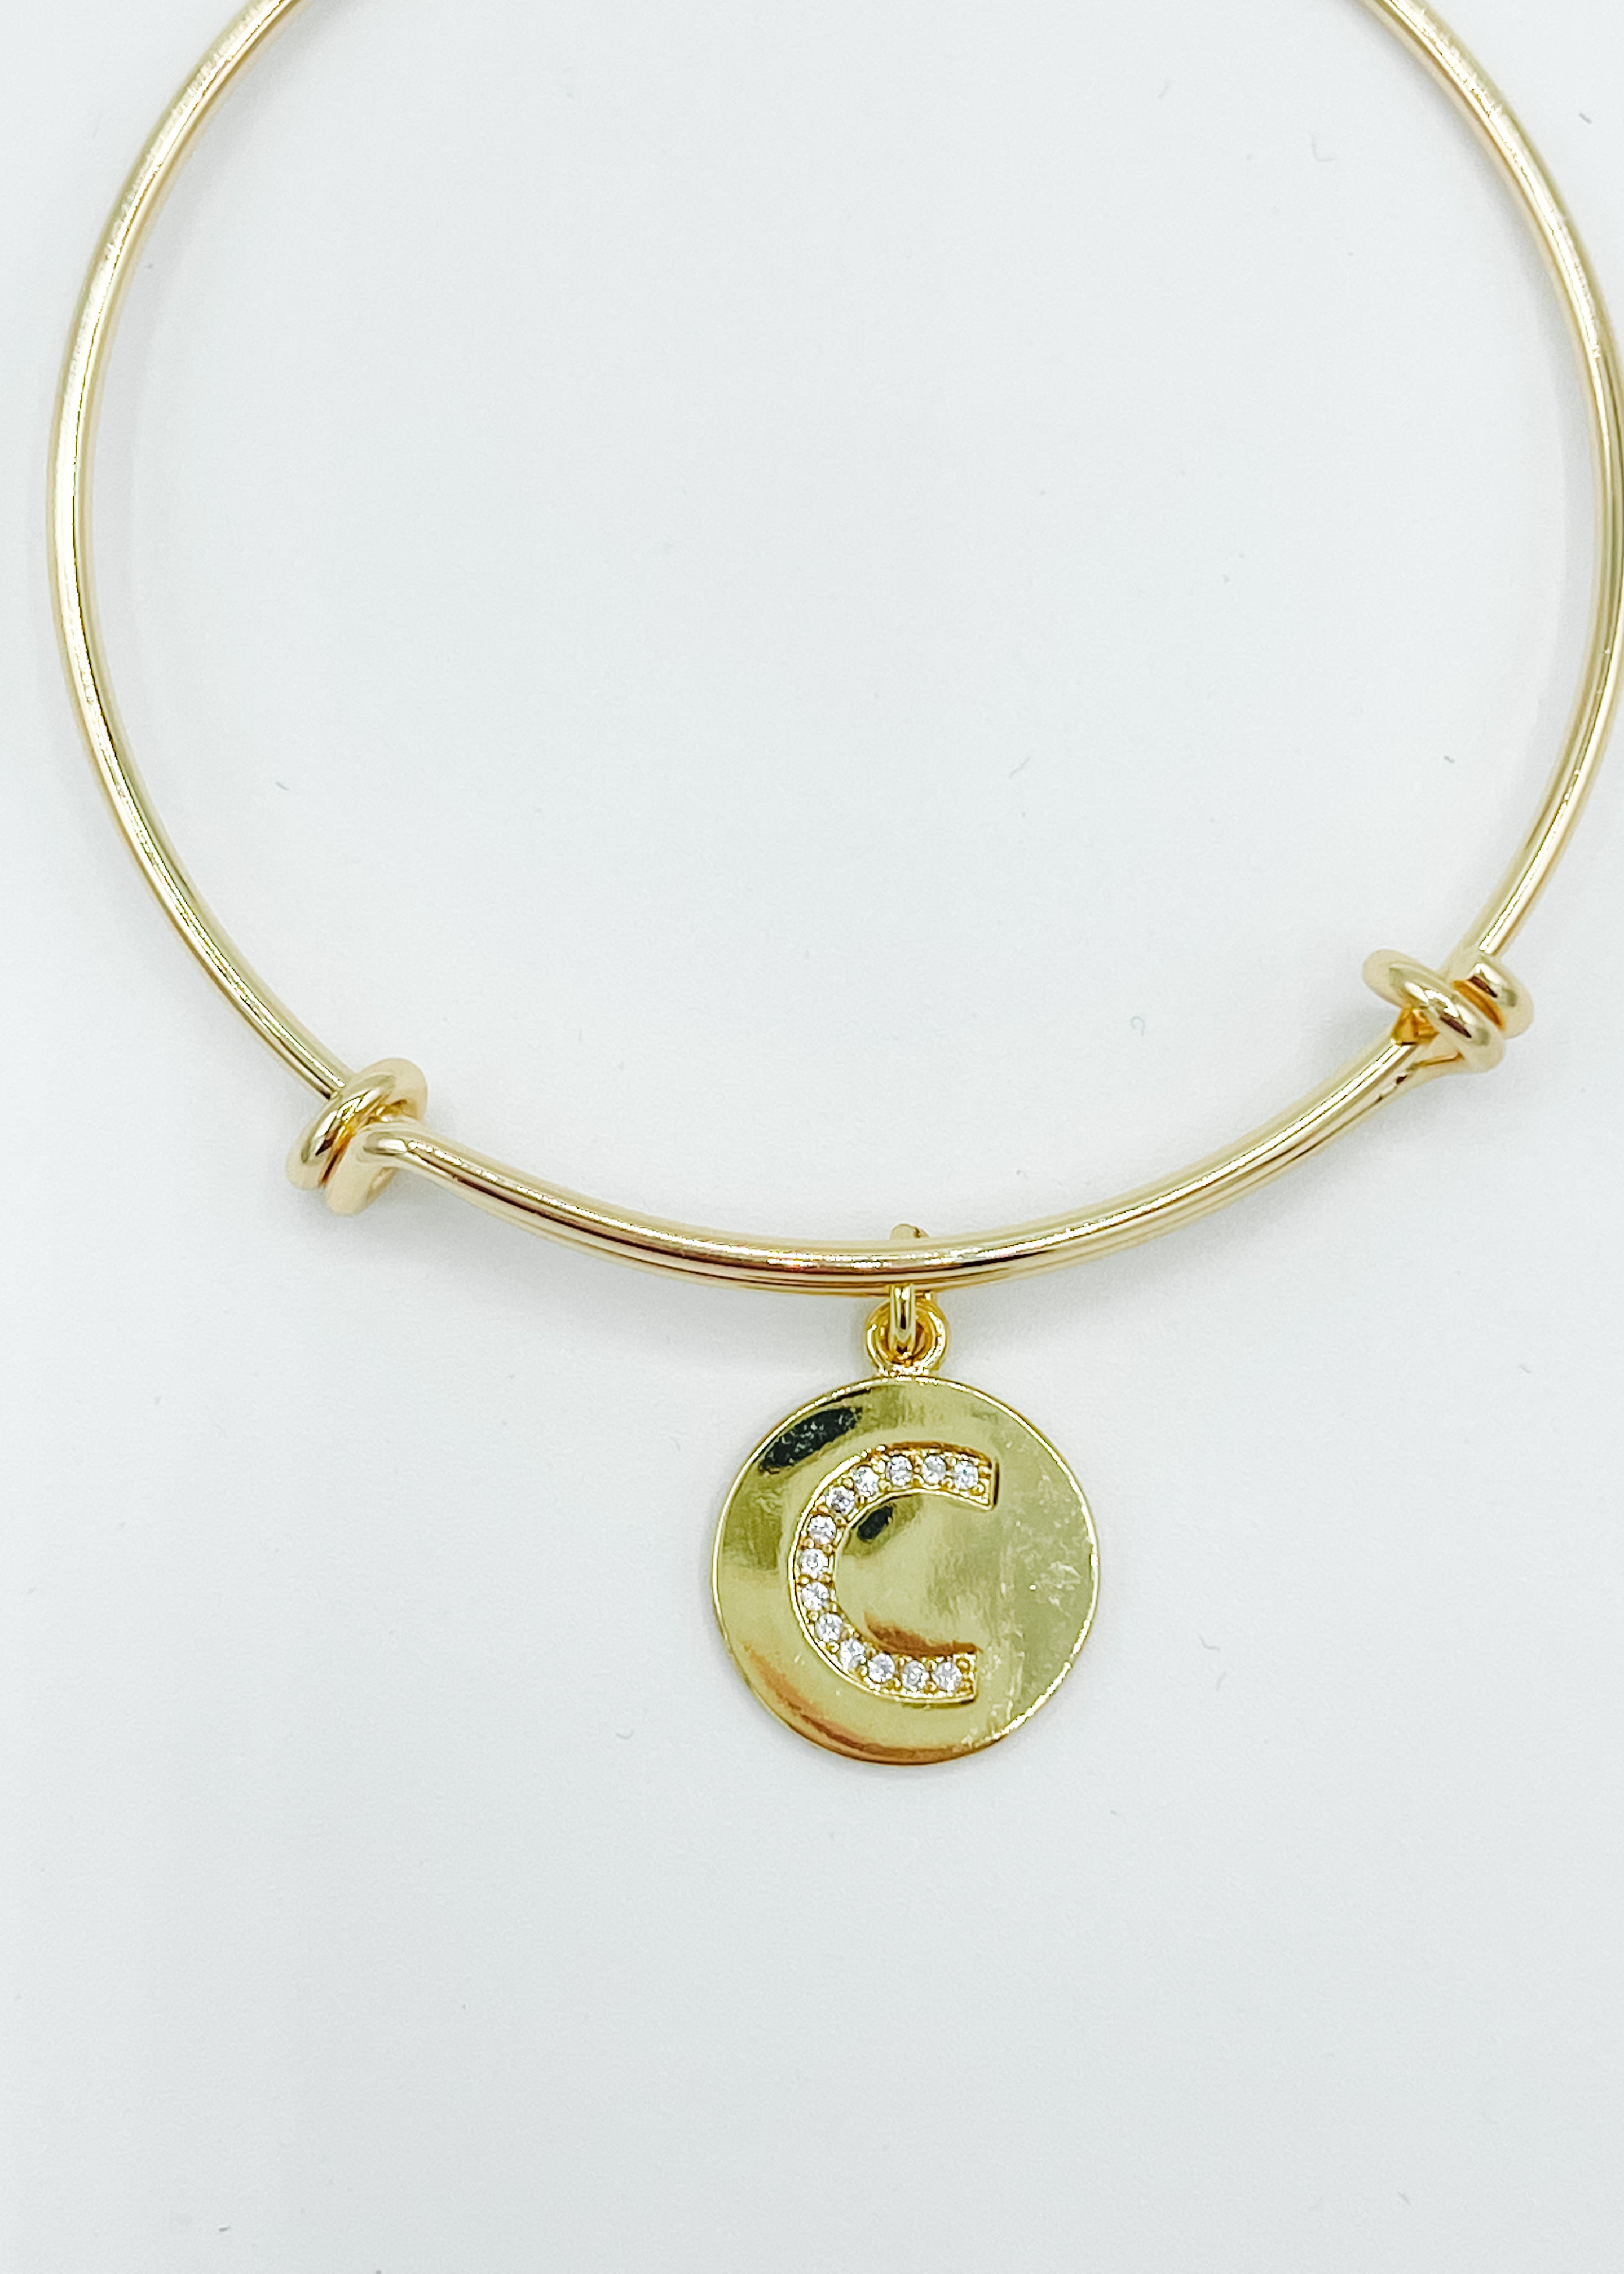 Gold Bangle with Letter